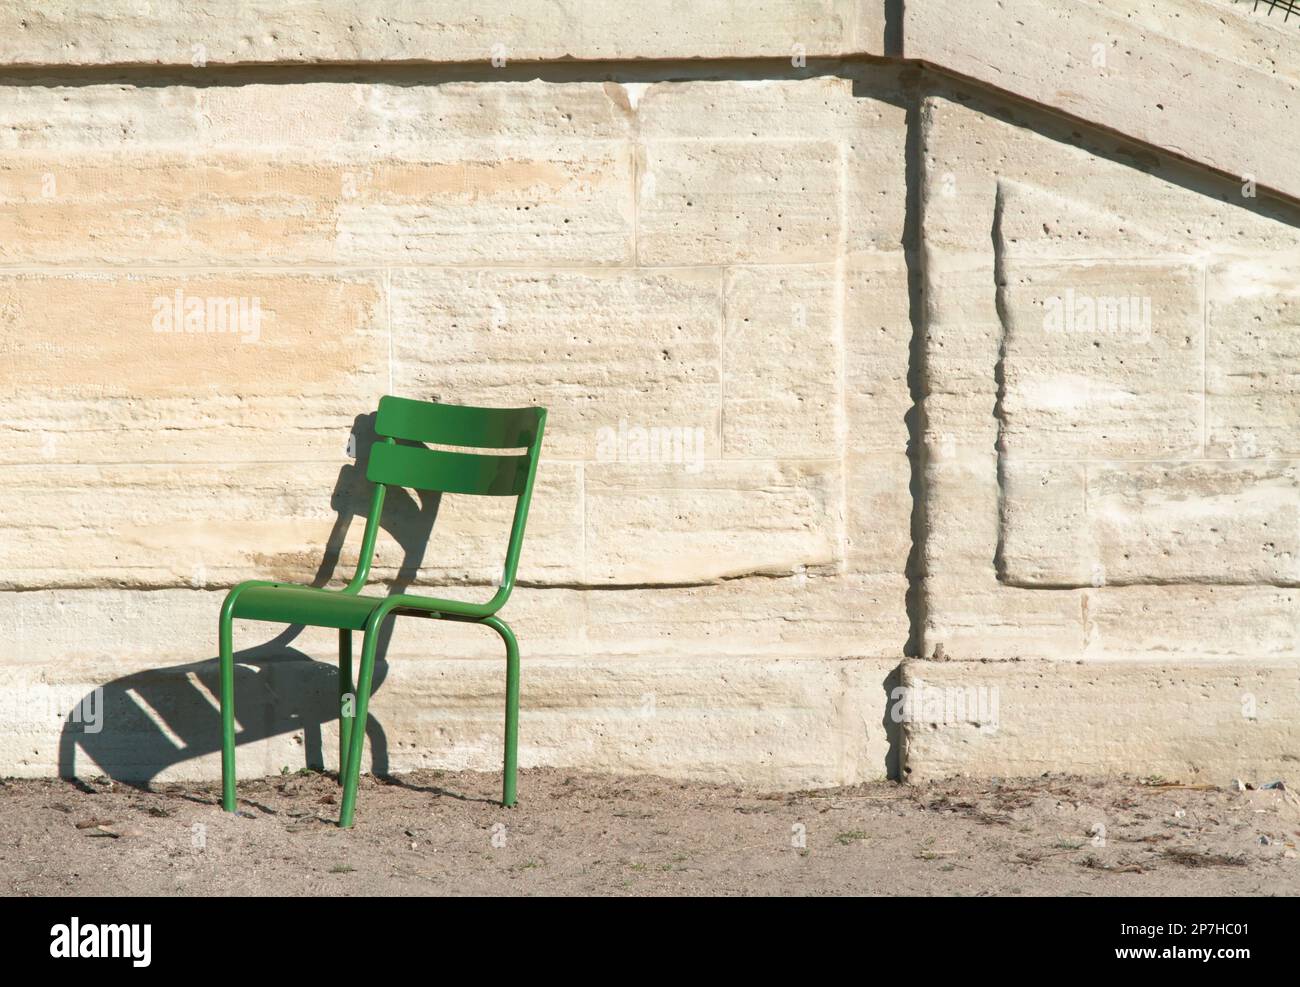 One Empty Green Chair Against A Stone Wall In The Jardin Tuileries, Paris France Stock Photo